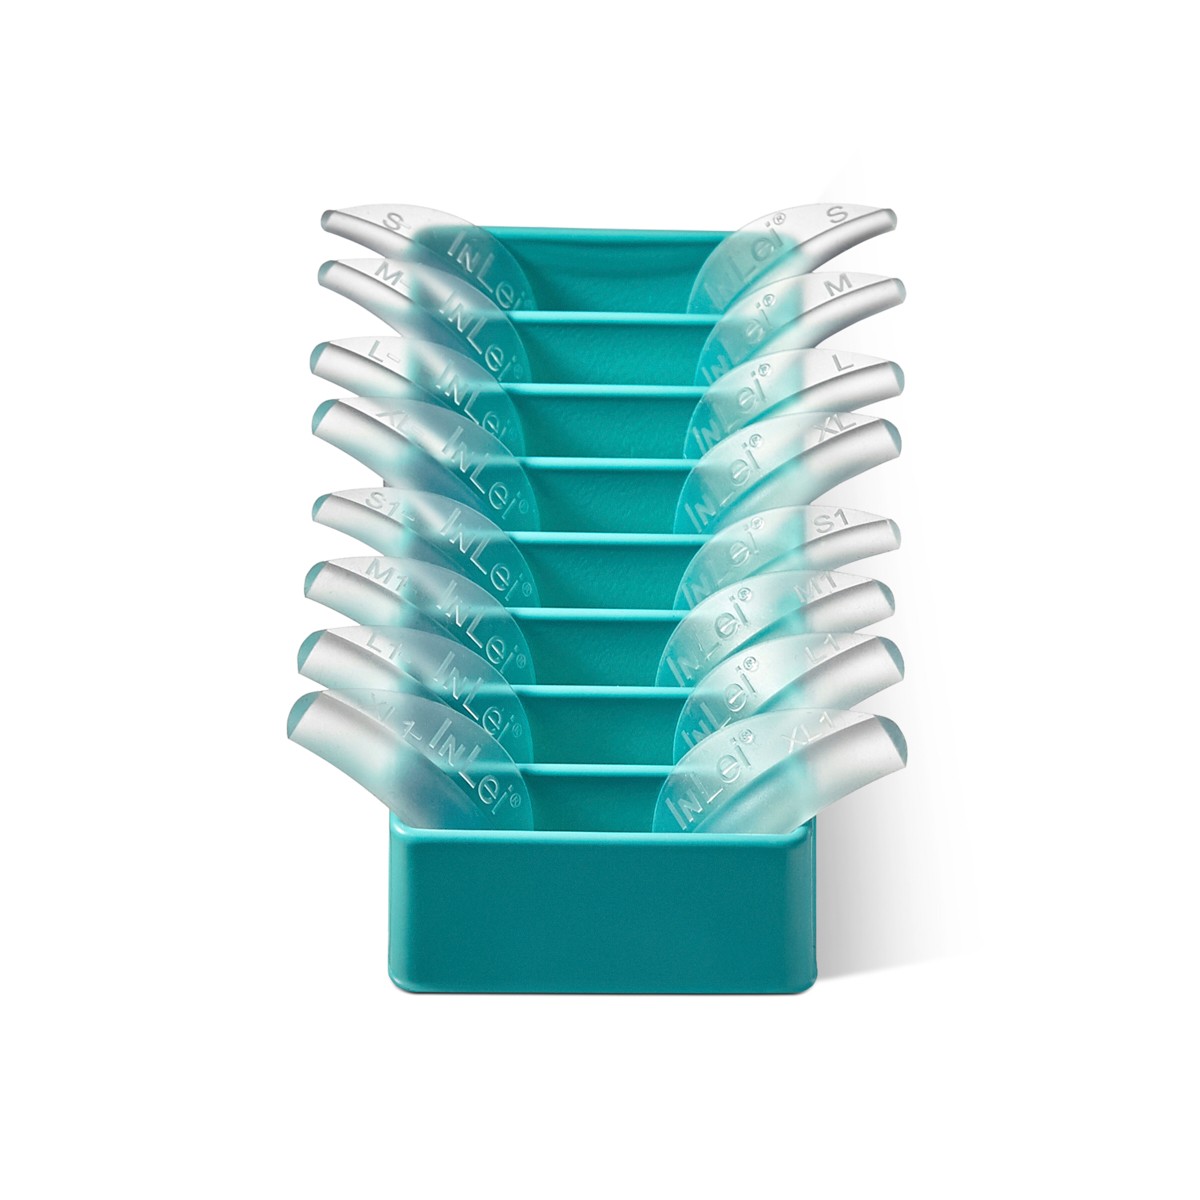 InLei® TOTAL - Silicone Lash Curlers (8 pairs)